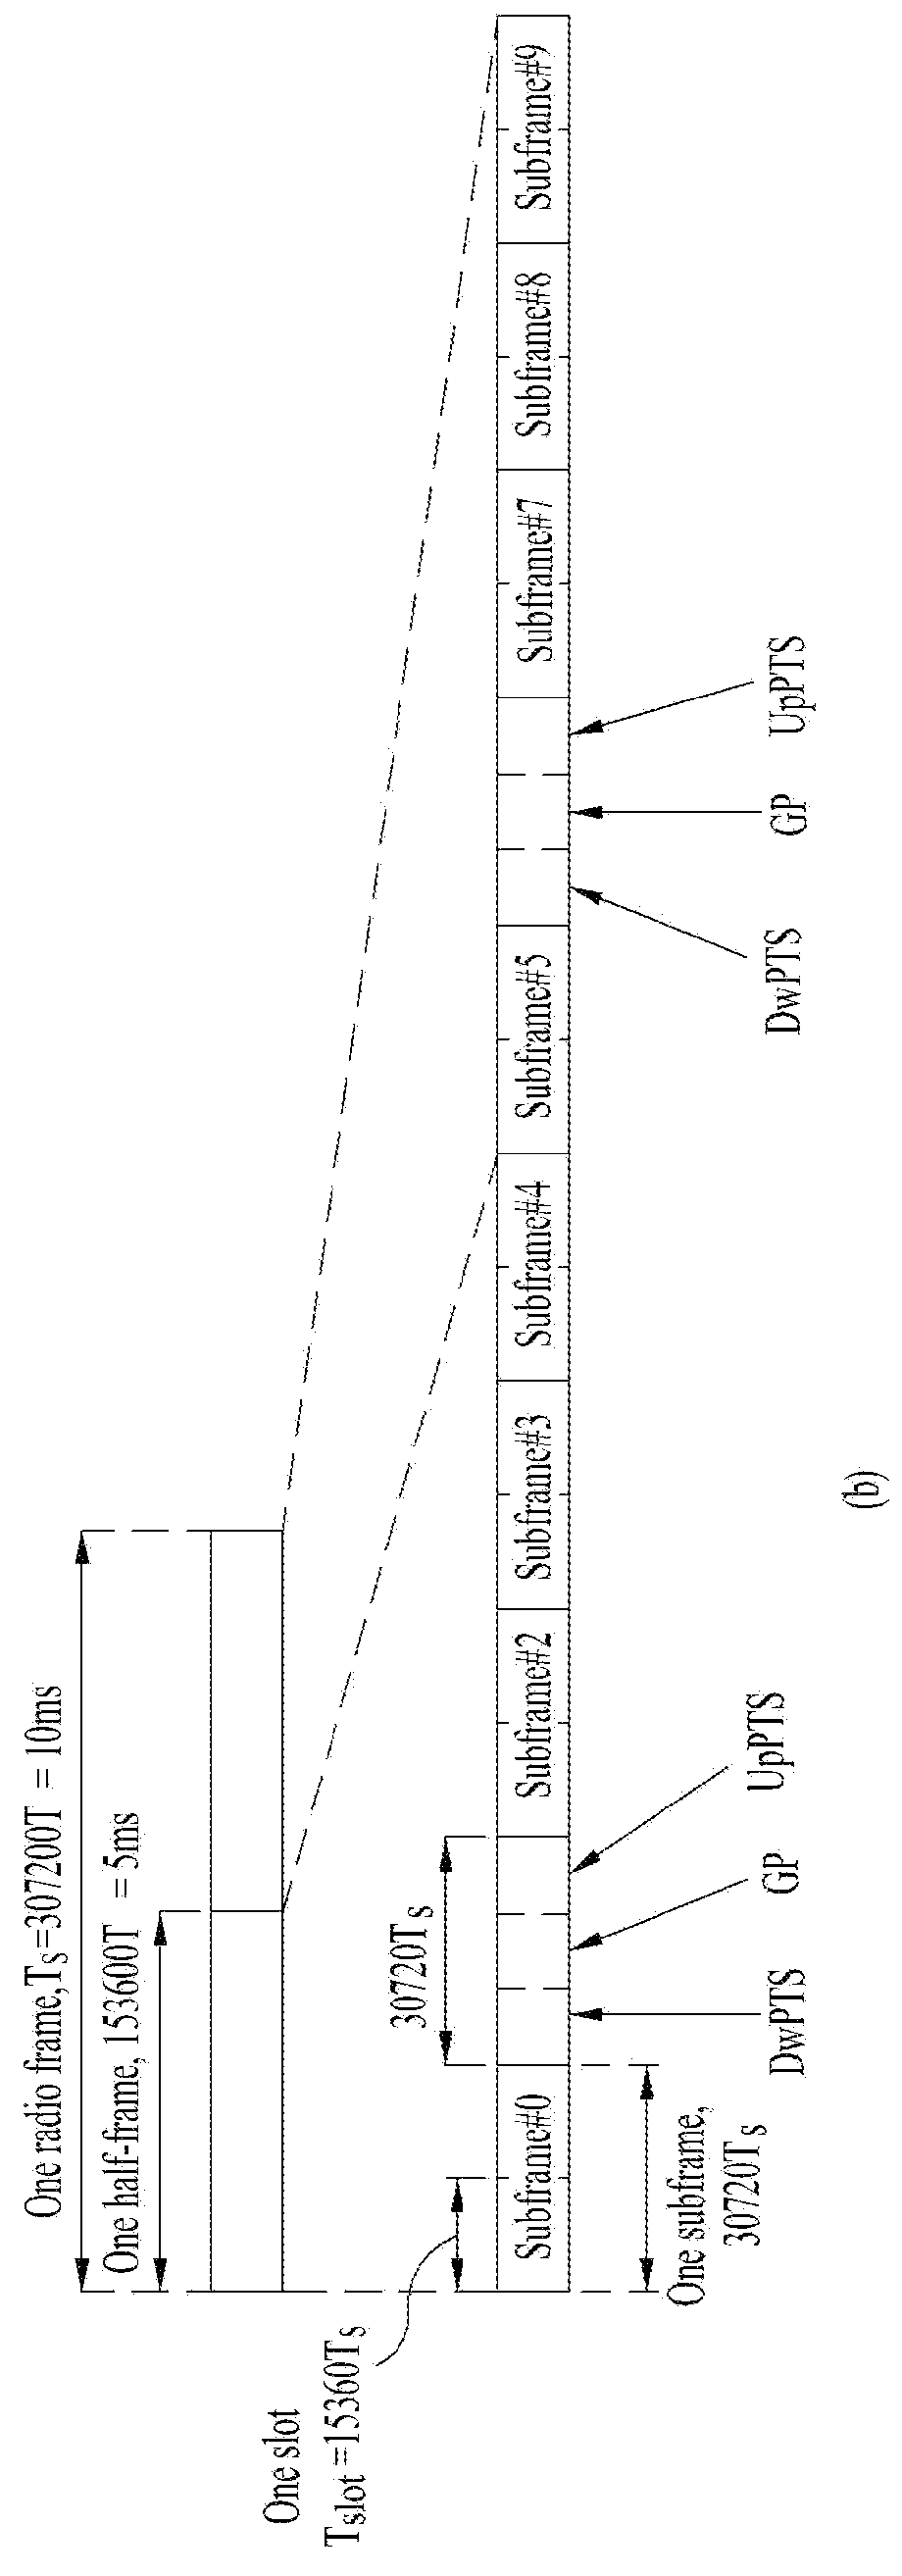 Method for making device to device communication in wireless communications system and apparatus therefor